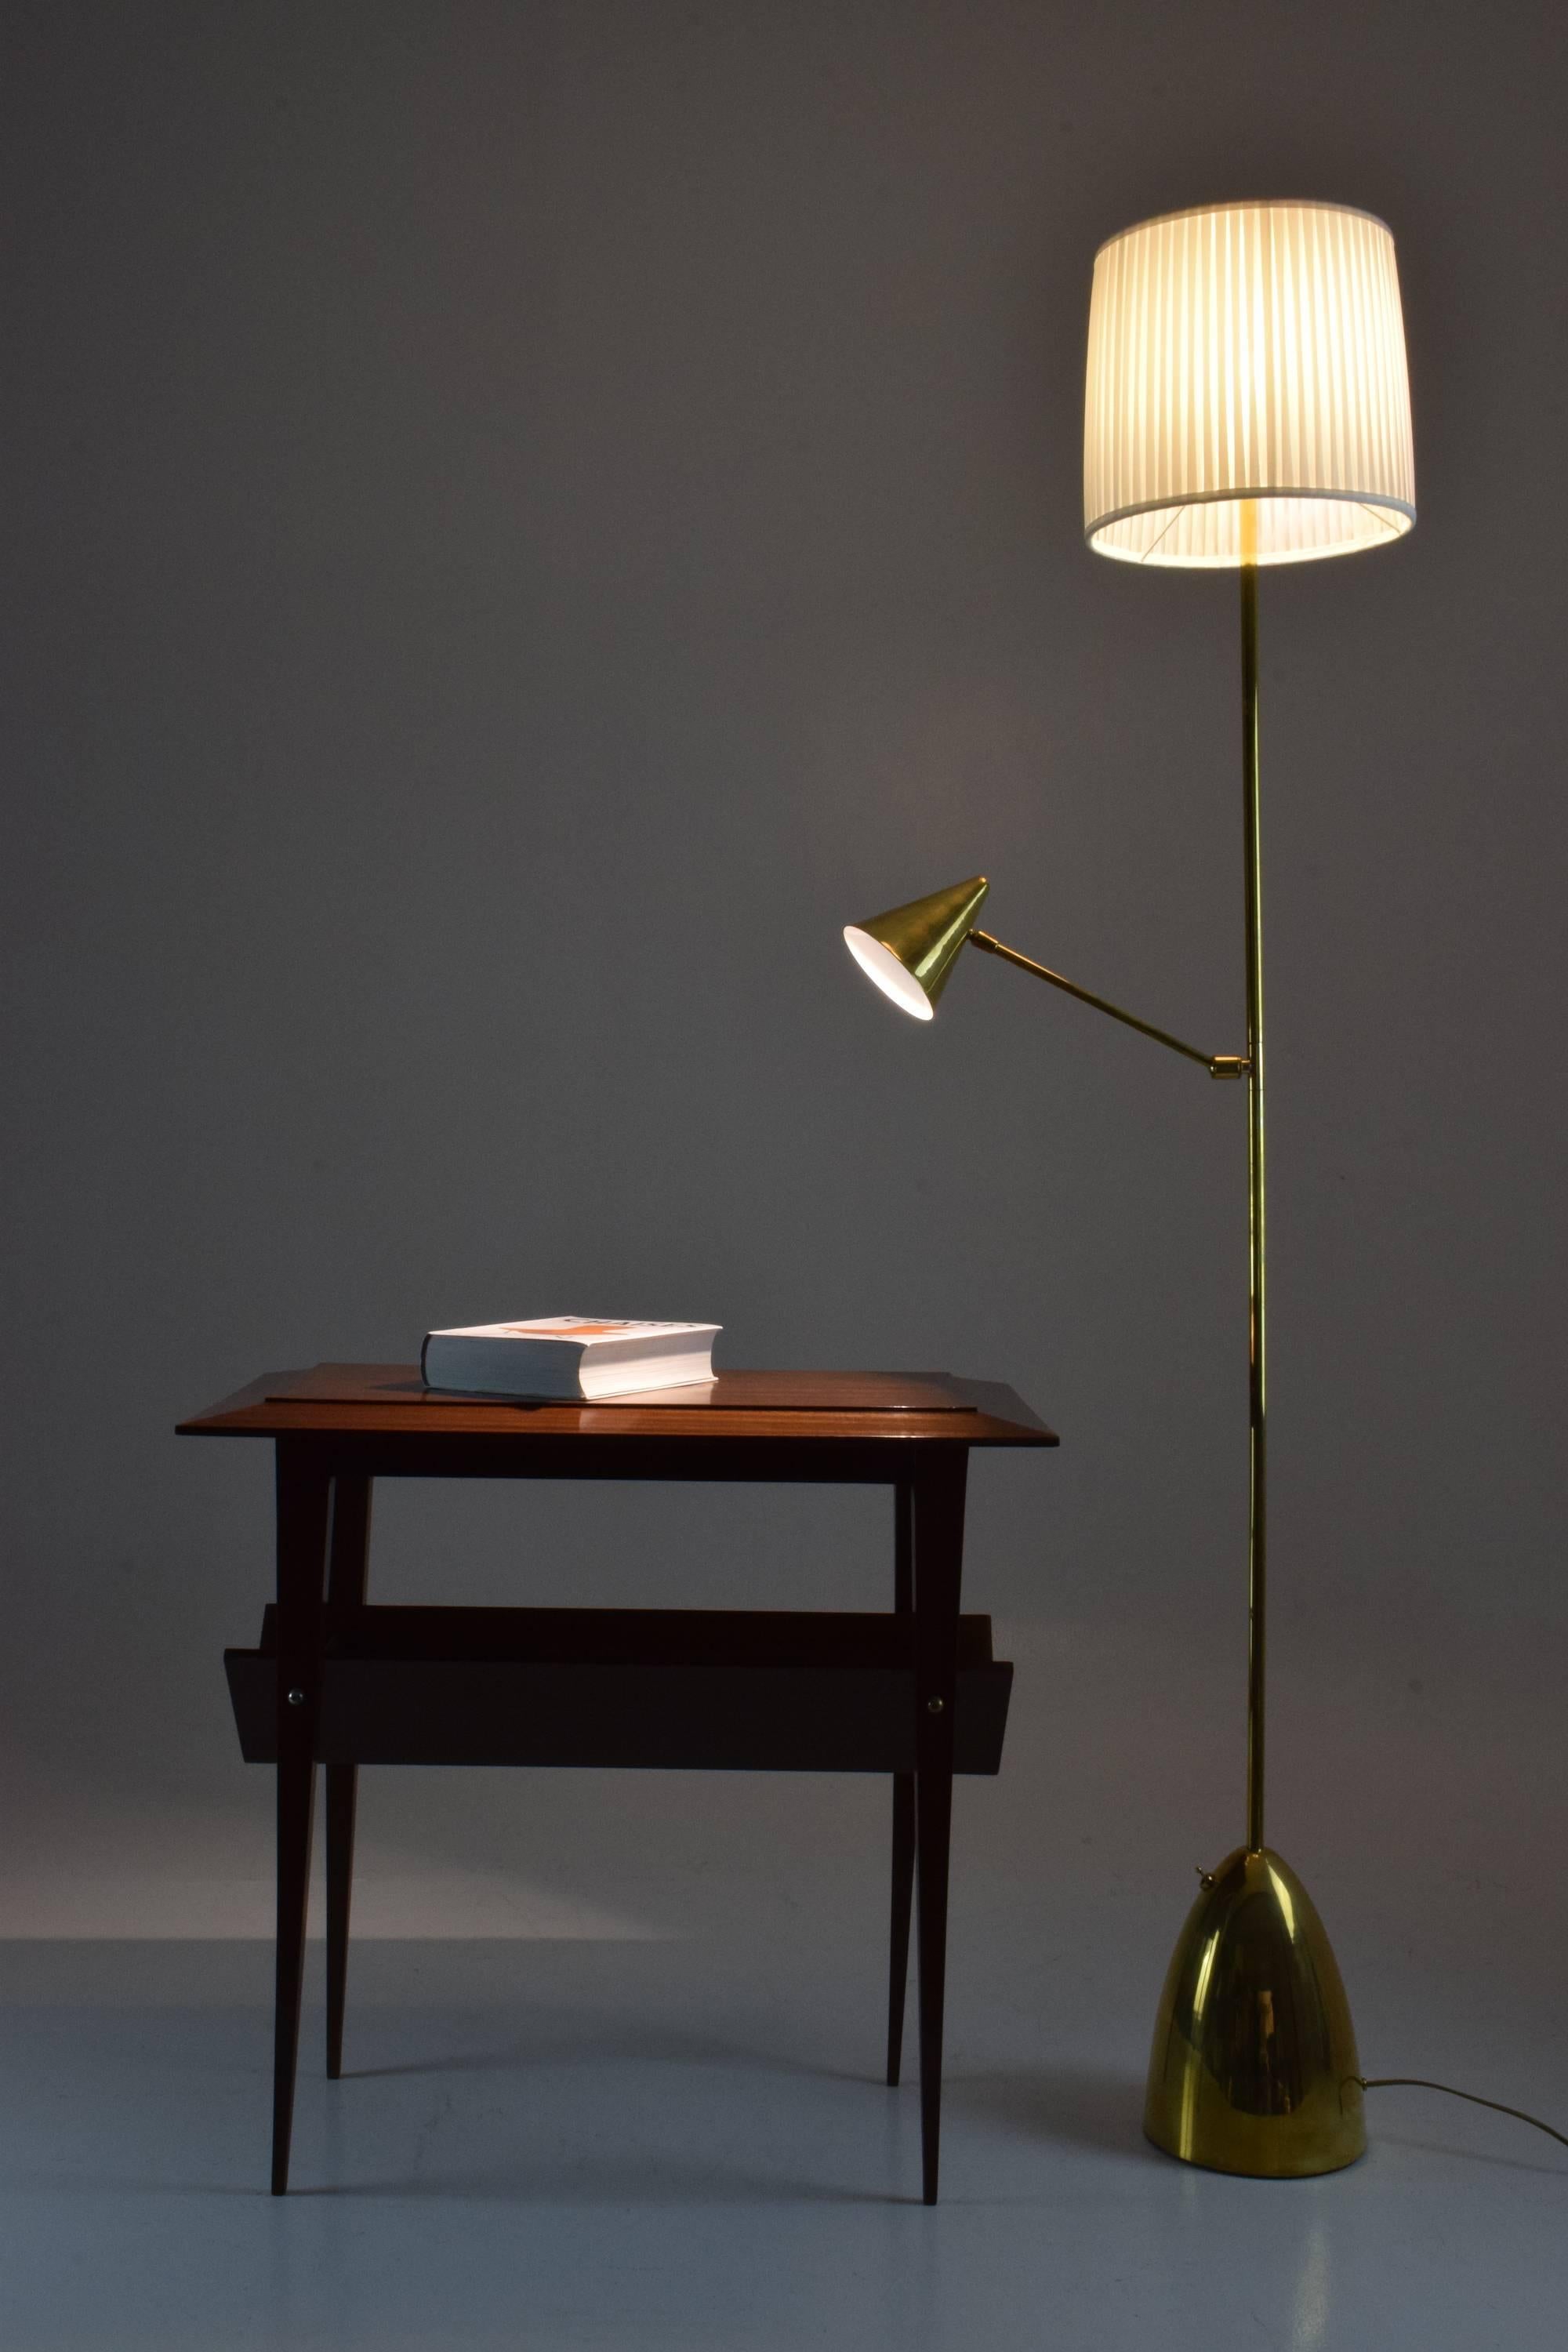 A floor lamp designed with a reading light positioned mid-length which articulates a conical brass shade so you can direct the light with ease. Both lighting systems work independently making it a functional addition to any living areas near coffee